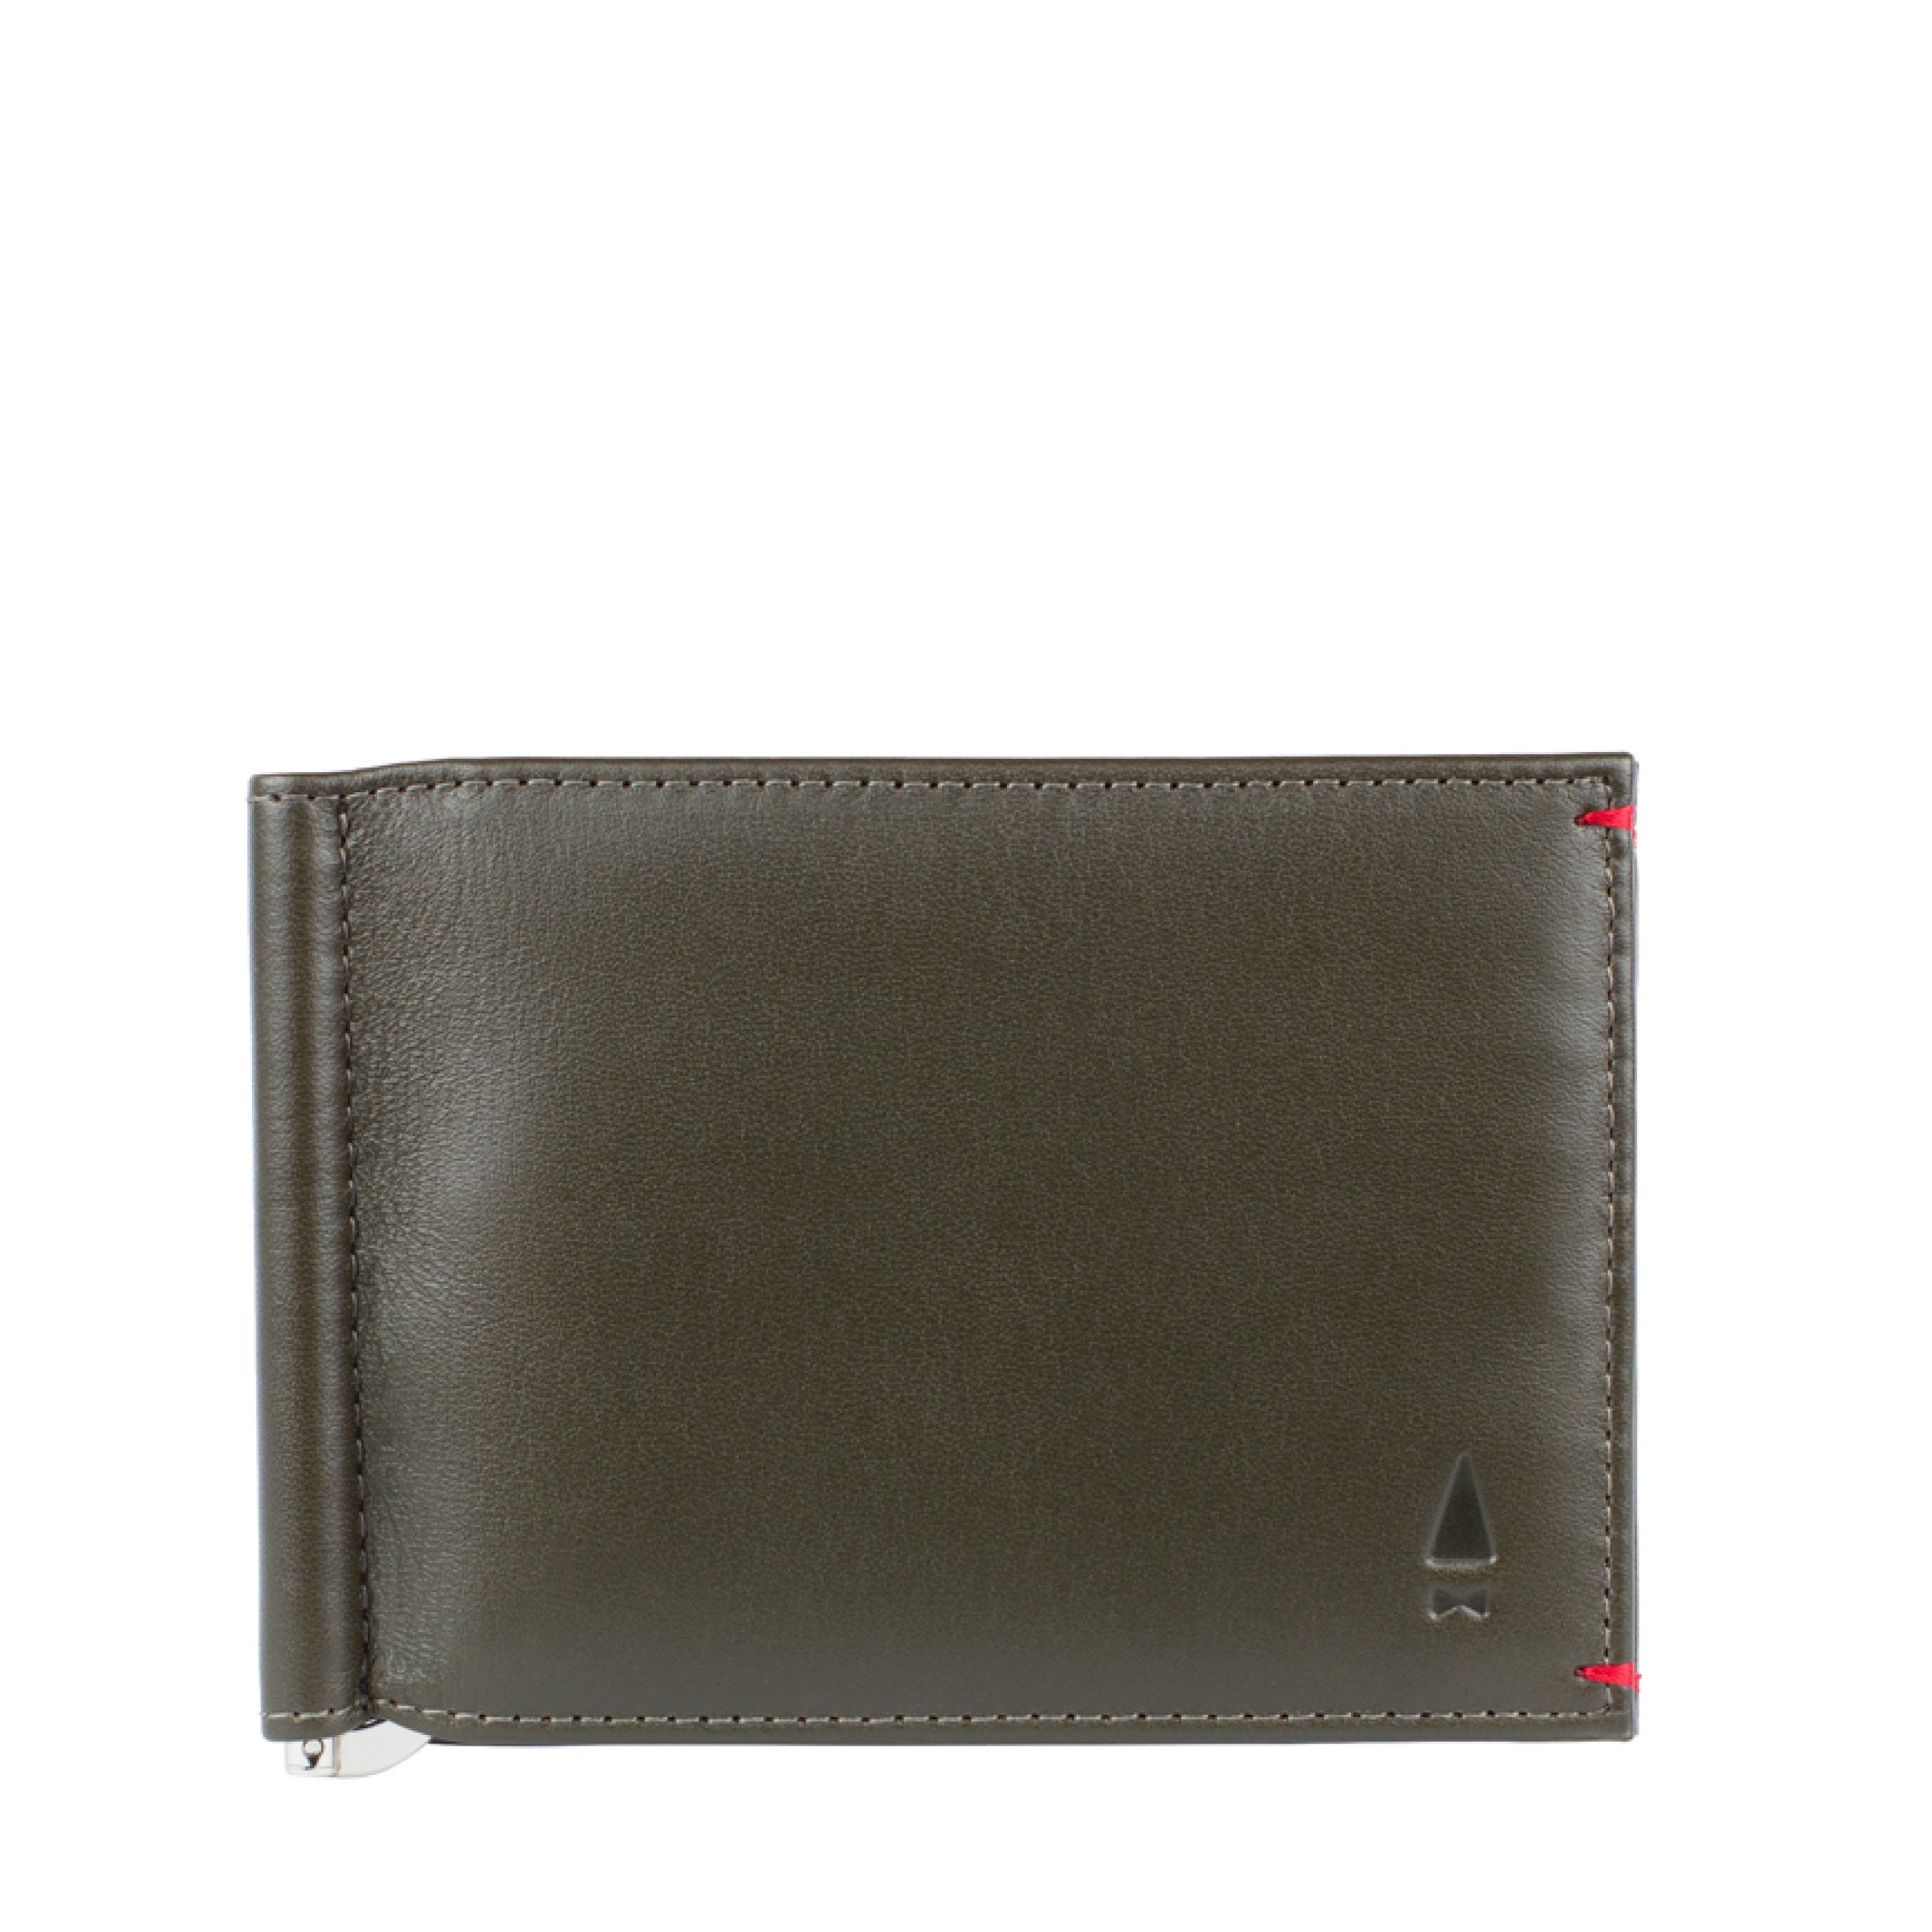 JEKYLL & HIDE OXFORD LEATHER PURSE - Destinations by Frasers